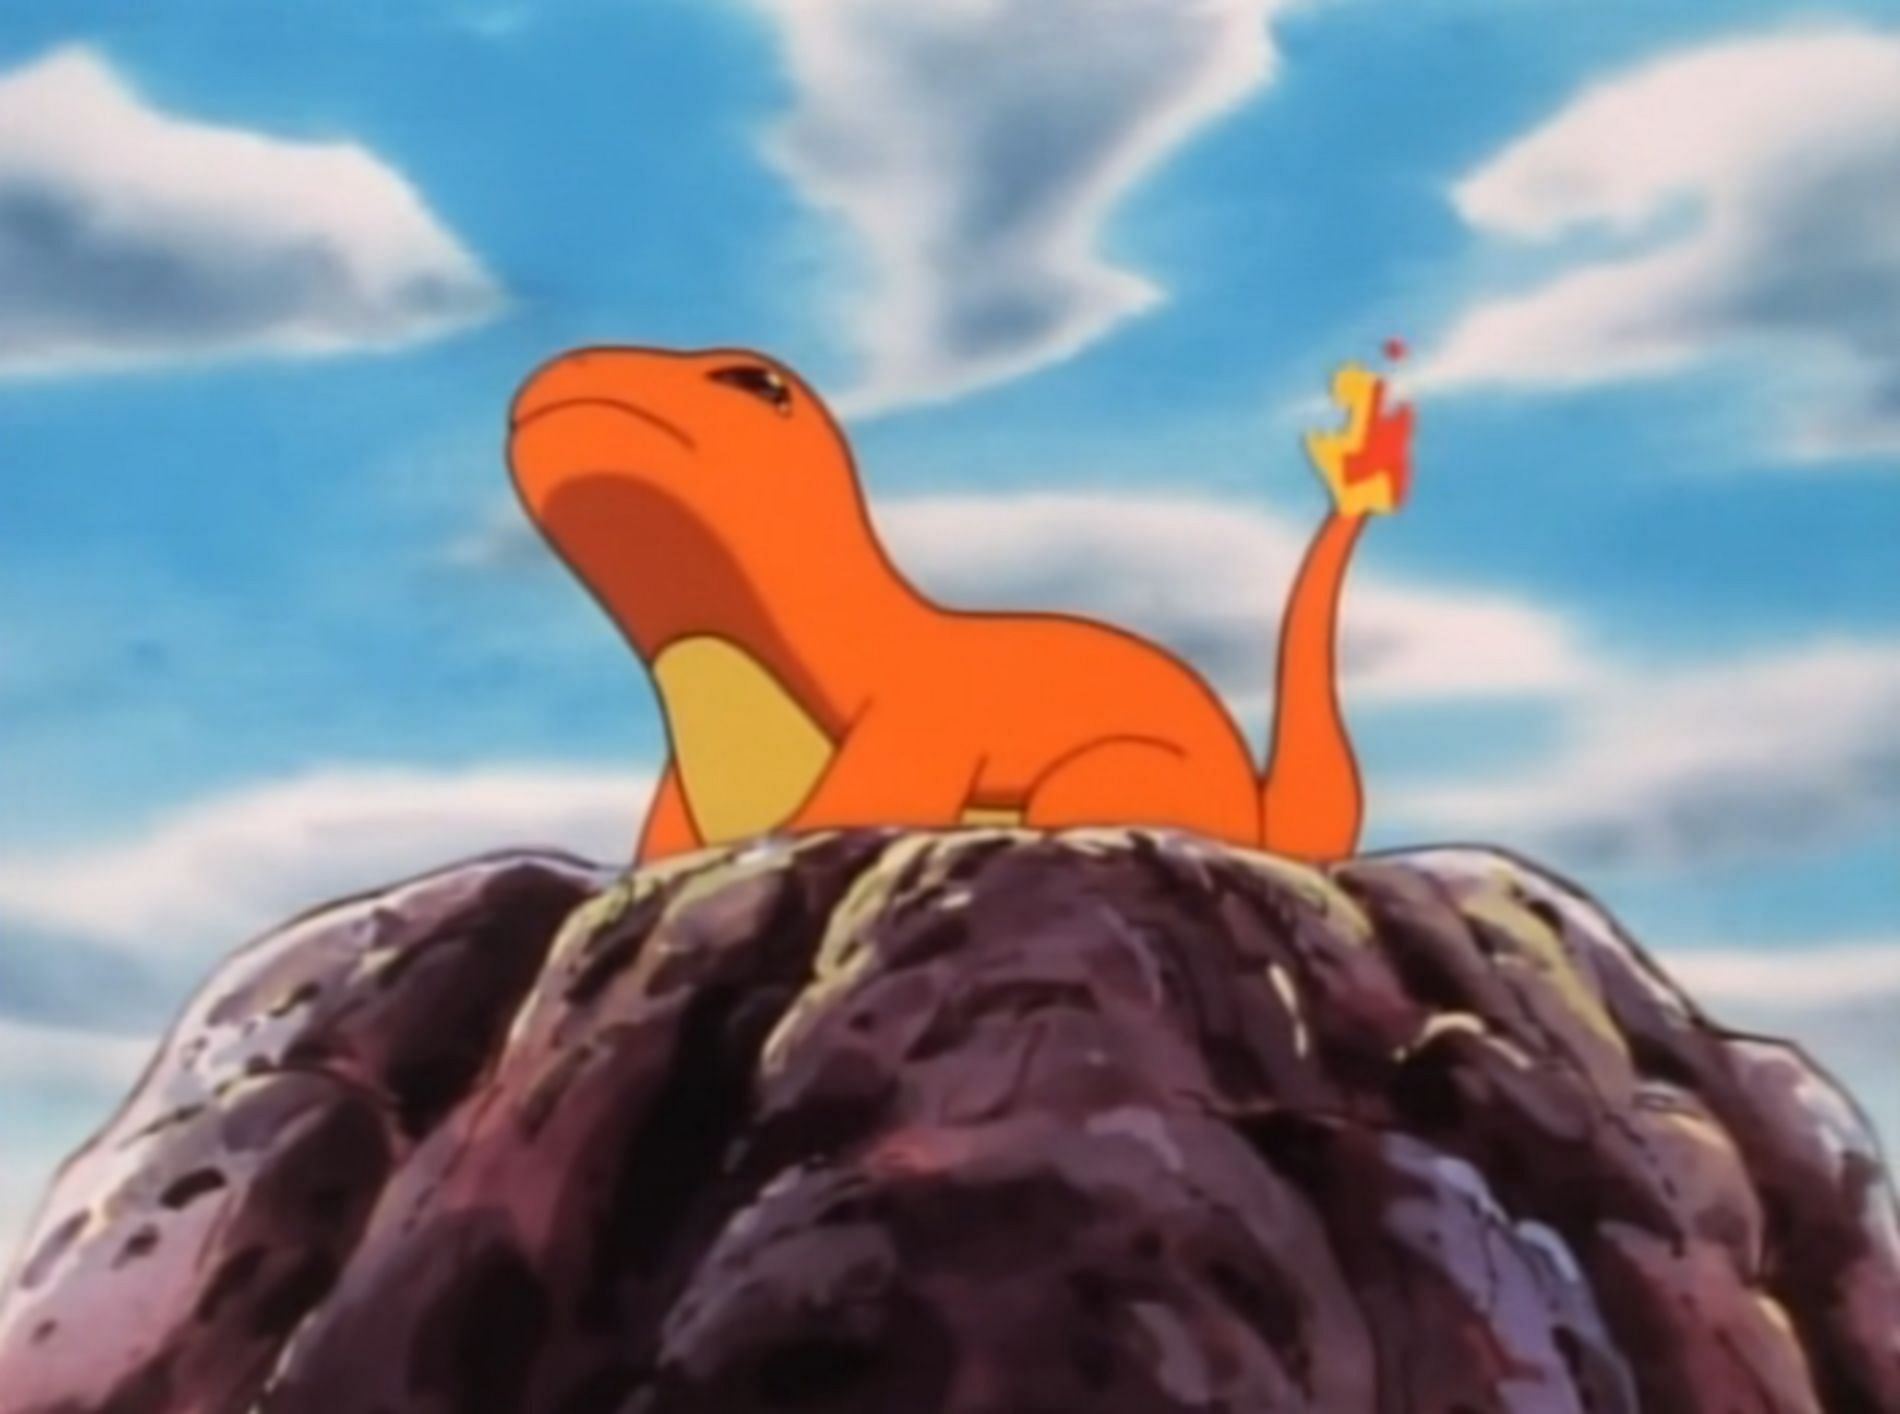 Ash&#039;s Charmander went through a dangerous ordeal in its introduction (Image via The Pokemon Company)